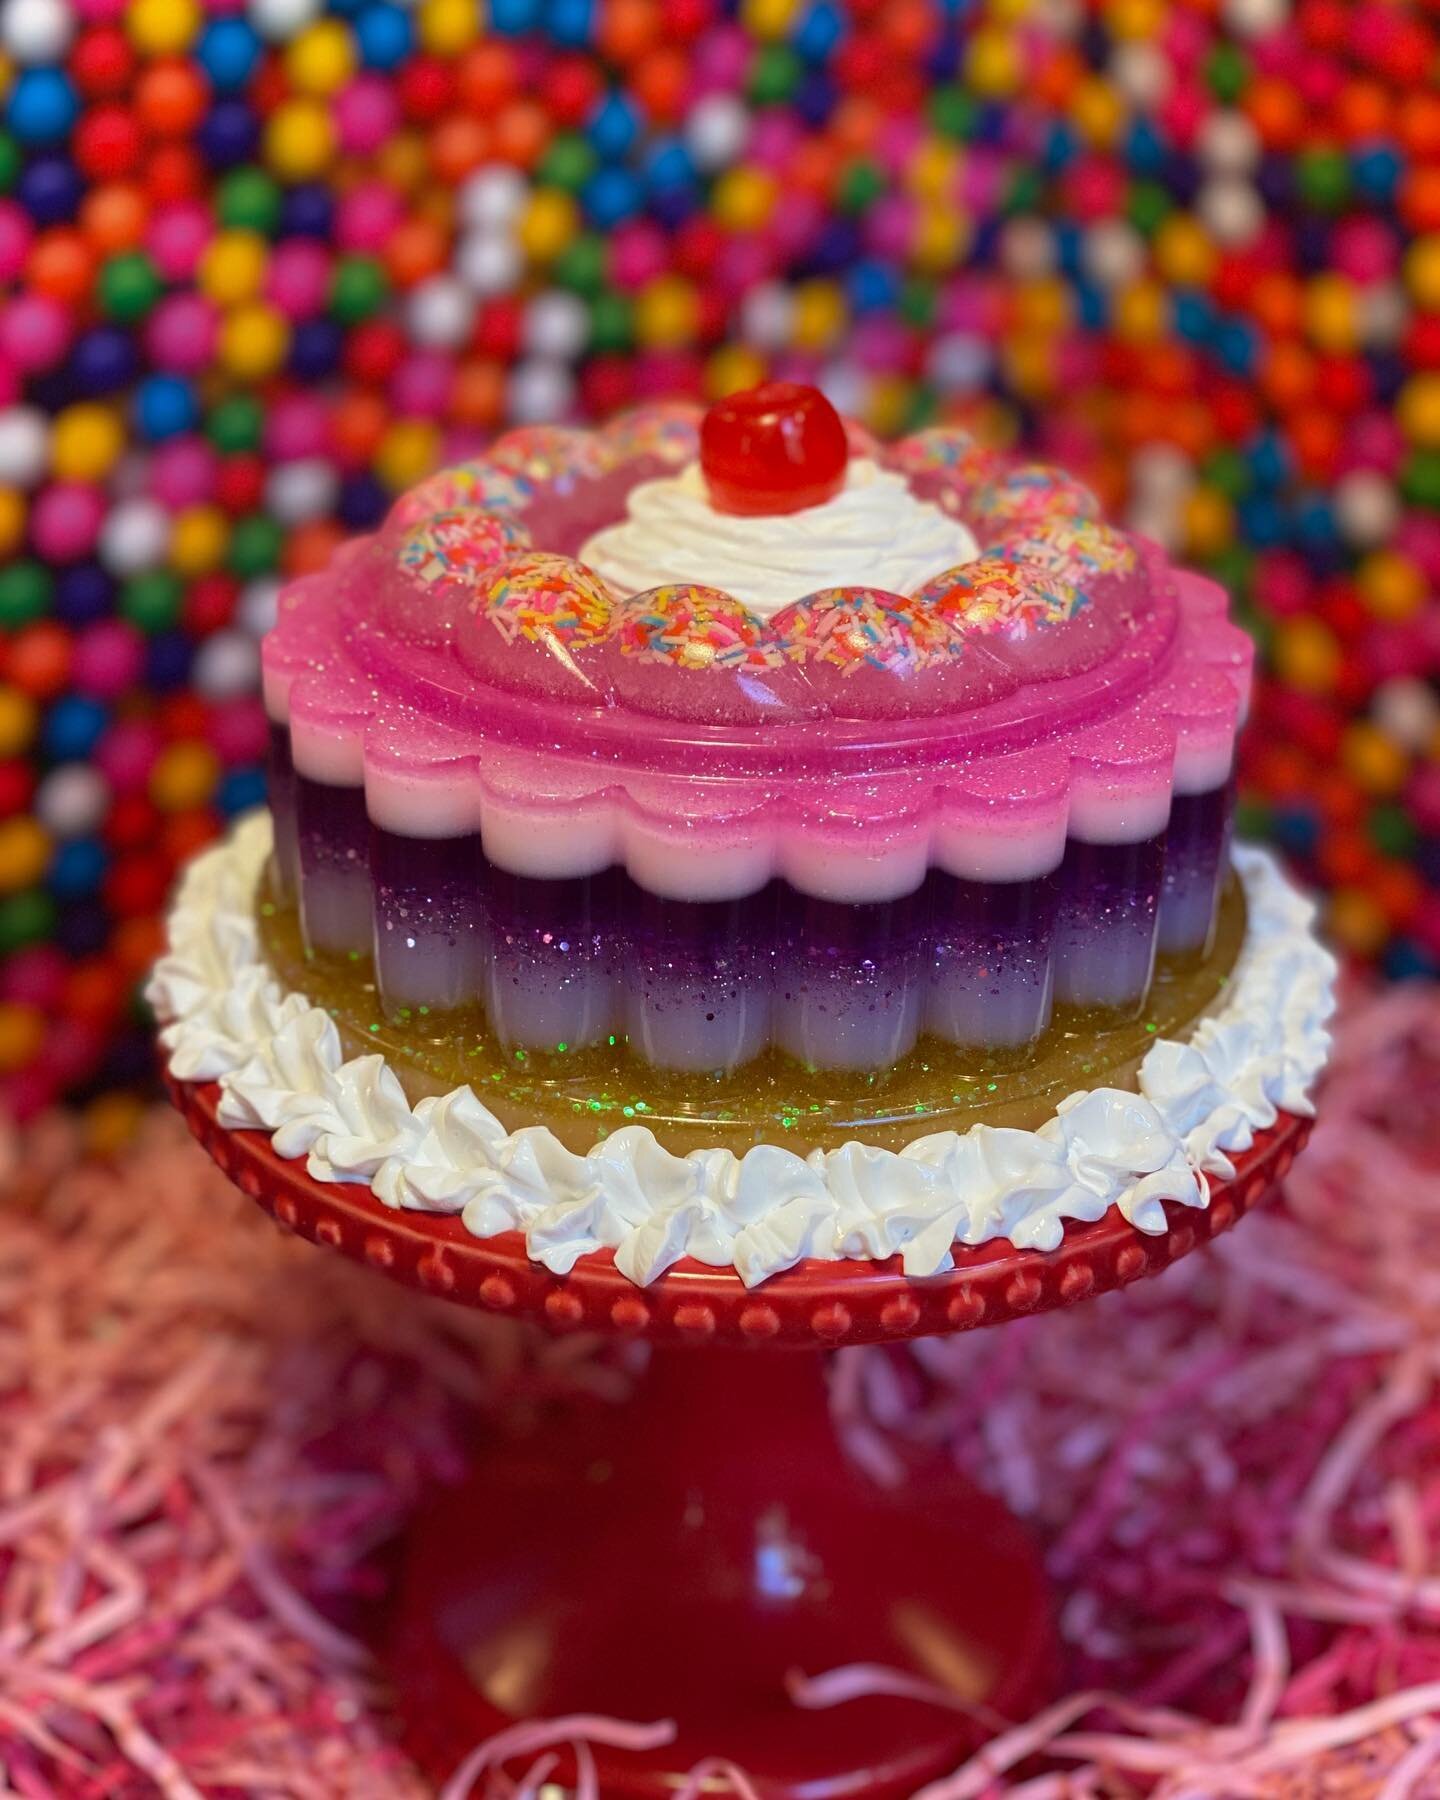 *SOLD* Say hello to the 🍭🍬 Candy Carousel 🍬🍭 Layers of crushed candies, fruit jelly and decadent hand-whipped cream make this dish an absolute dream. The &ldquo;Candy Carousel&rdquo; is an Elrod original  creation dreamt up in my own kitschy kitc